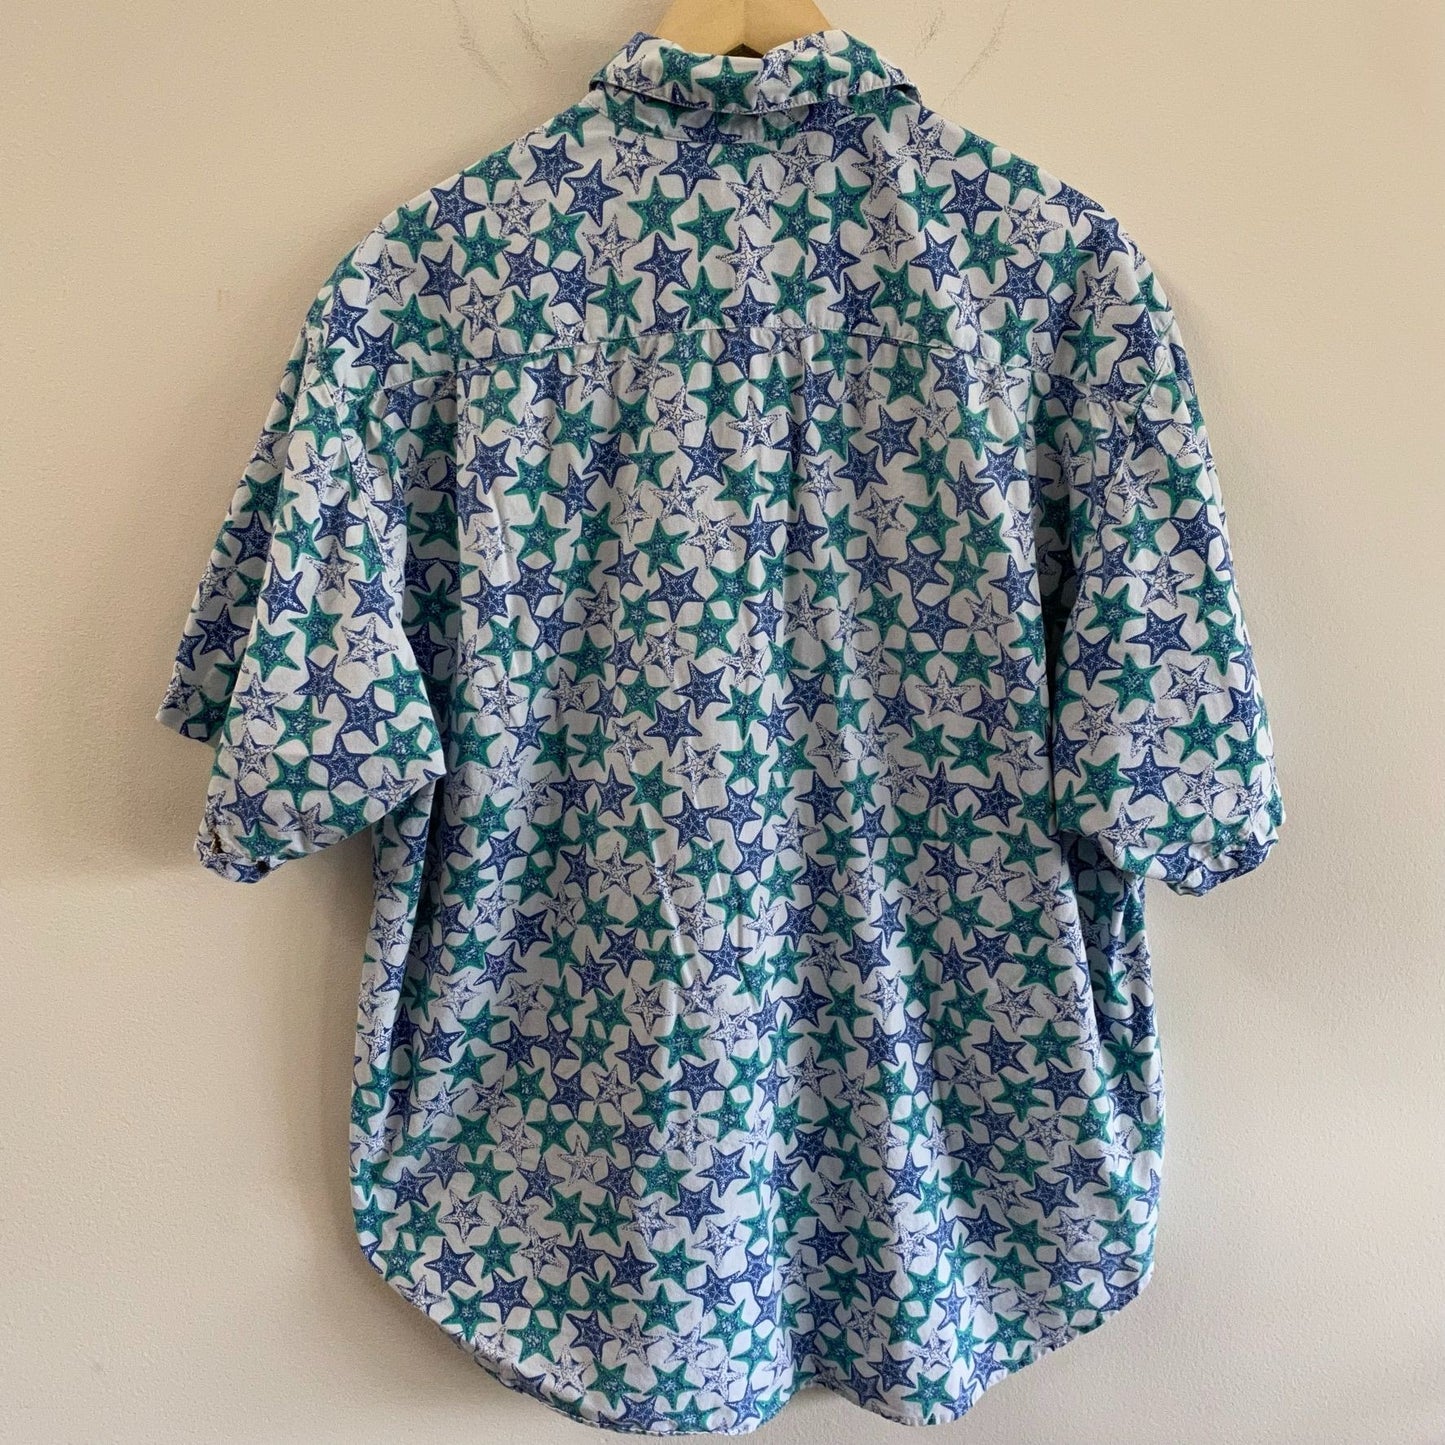 Vintage 80s Guess Stars S/S Shirt